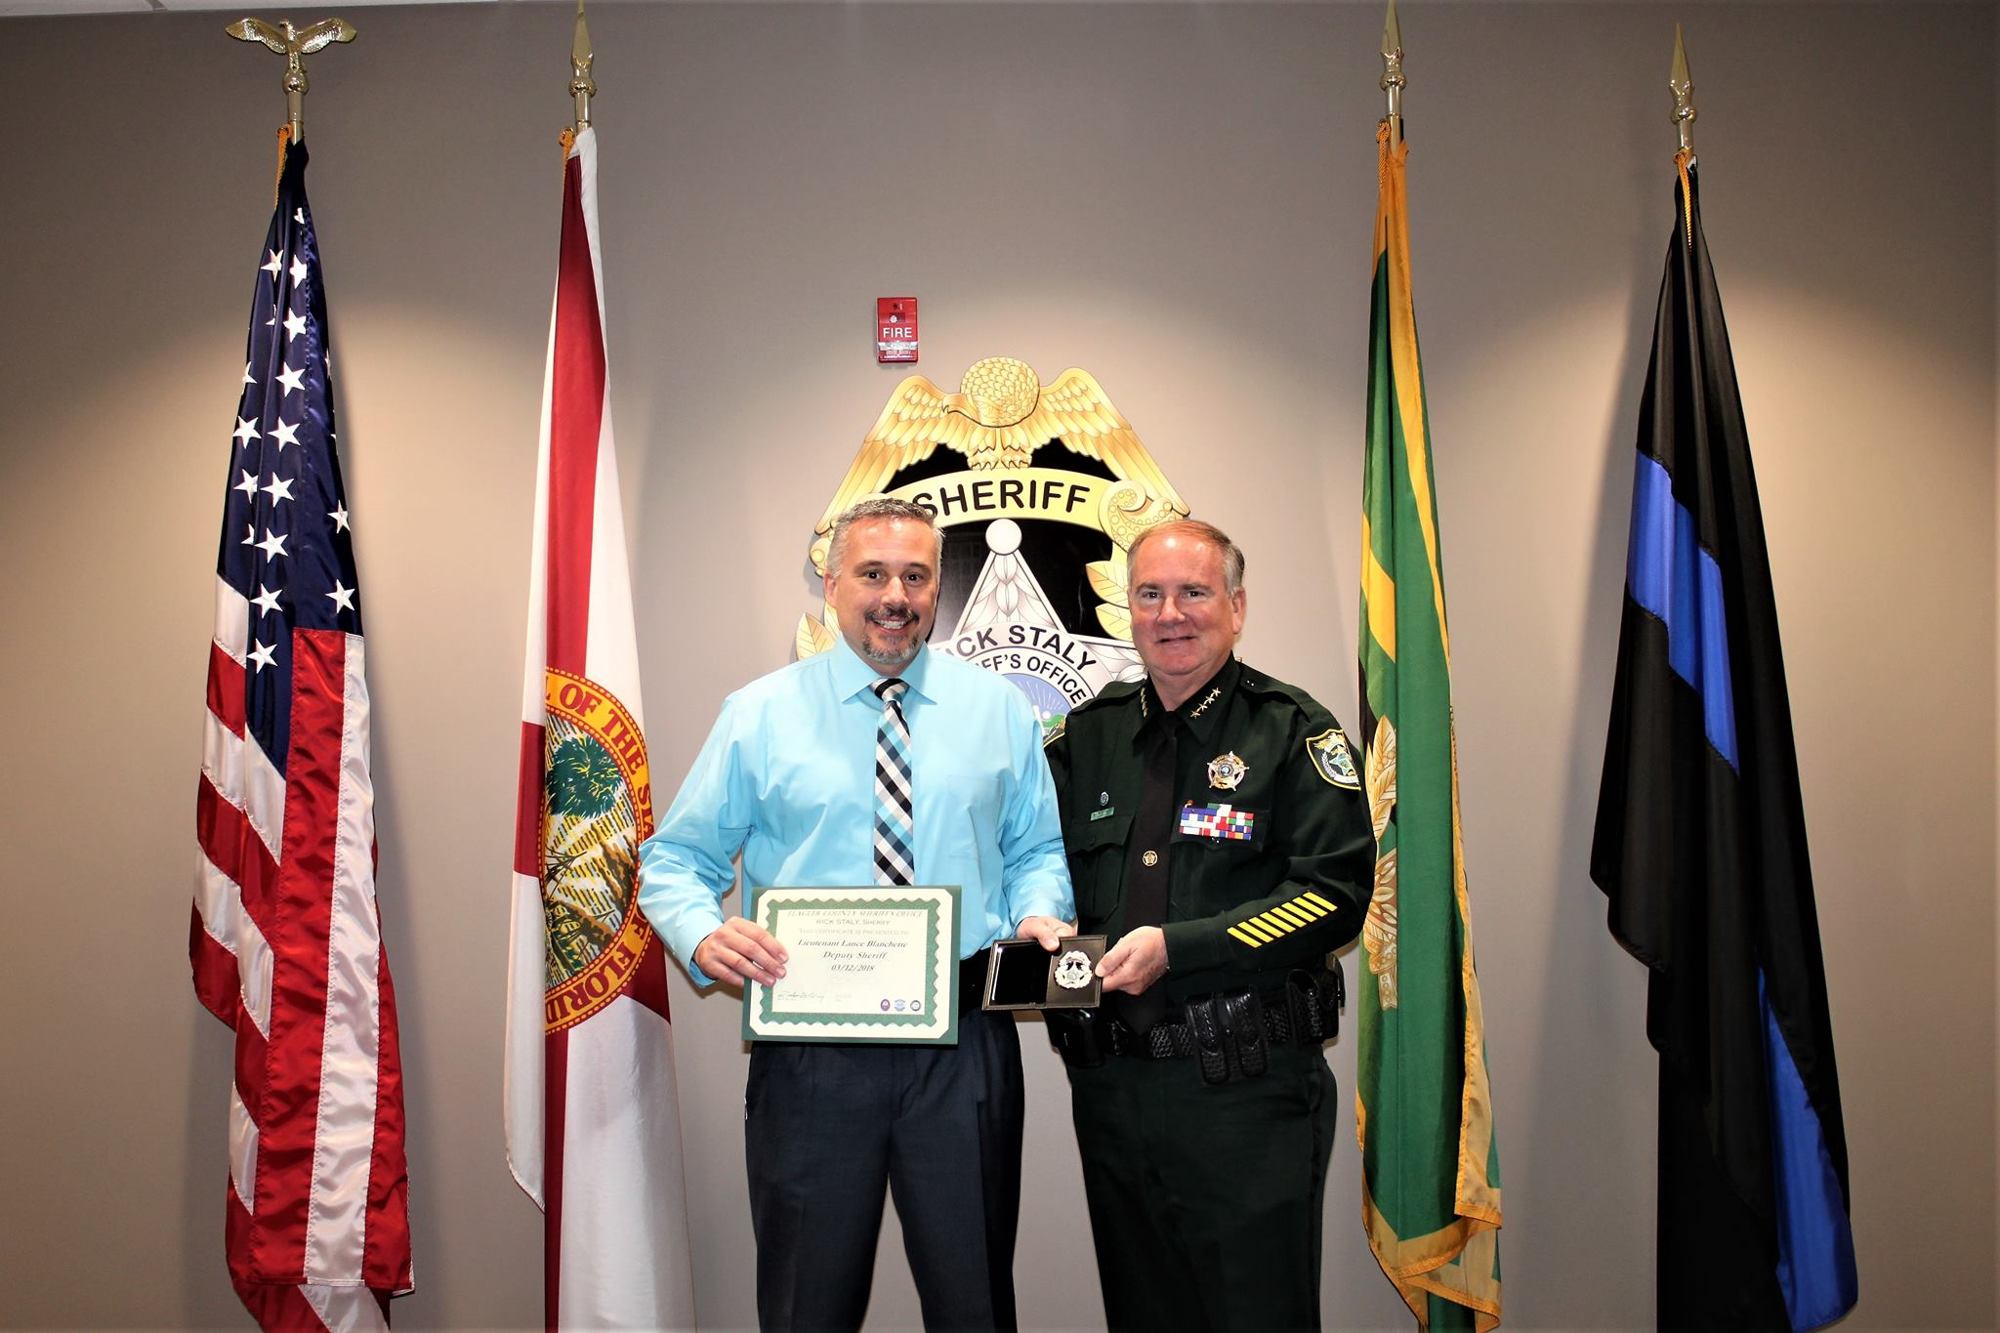 Flagler Beach Police Lt. Lance Blanchette is sworn in as a Flagler County Deputy Sheriff by Sheriff Rick Staly. Photo courtesy of Flagler Beach Police Department Facebook